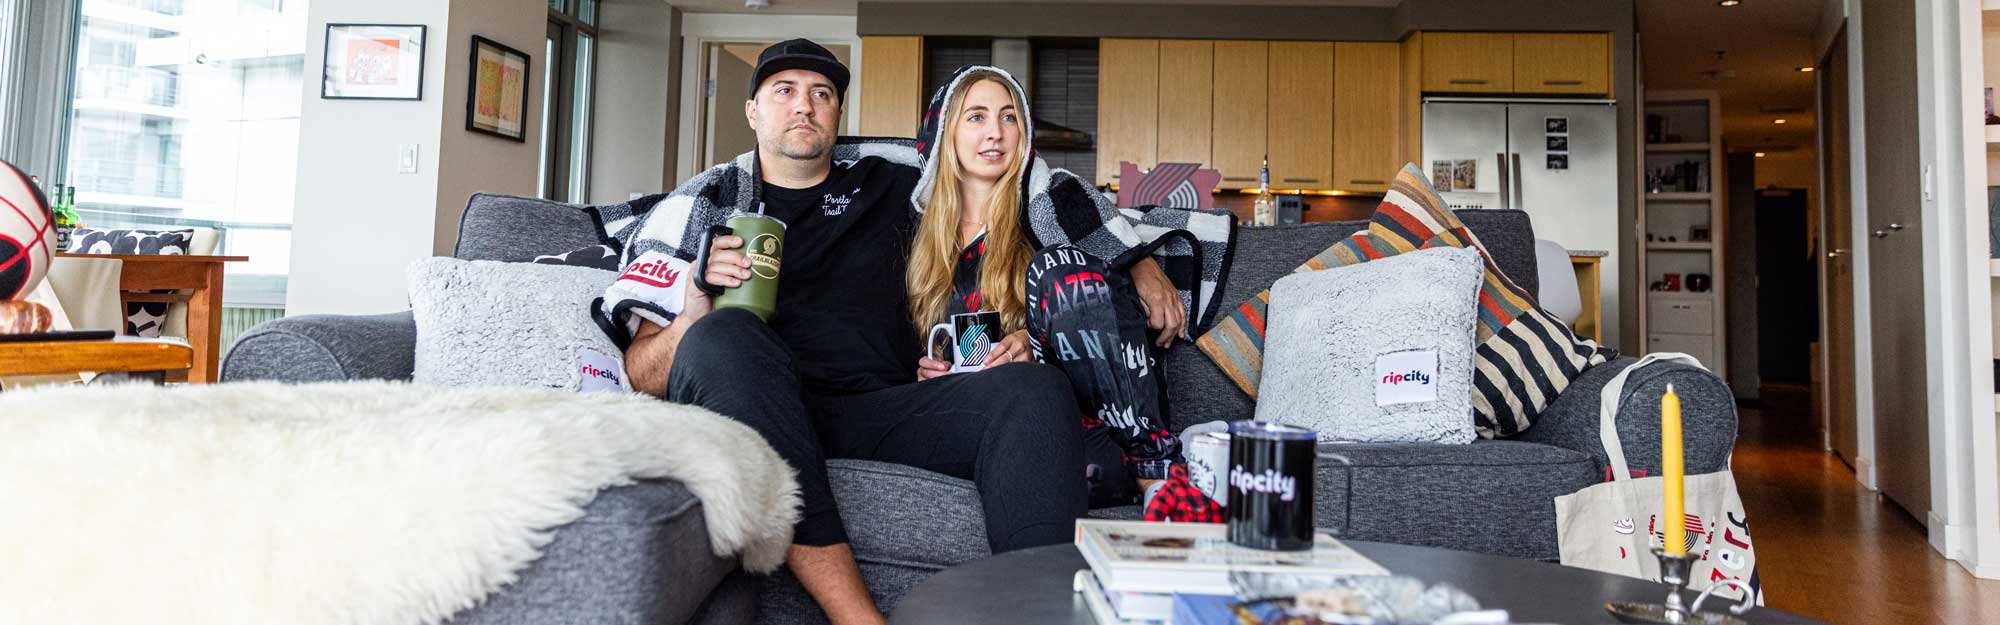 Image of couple in house surrounded by Blazers Gear